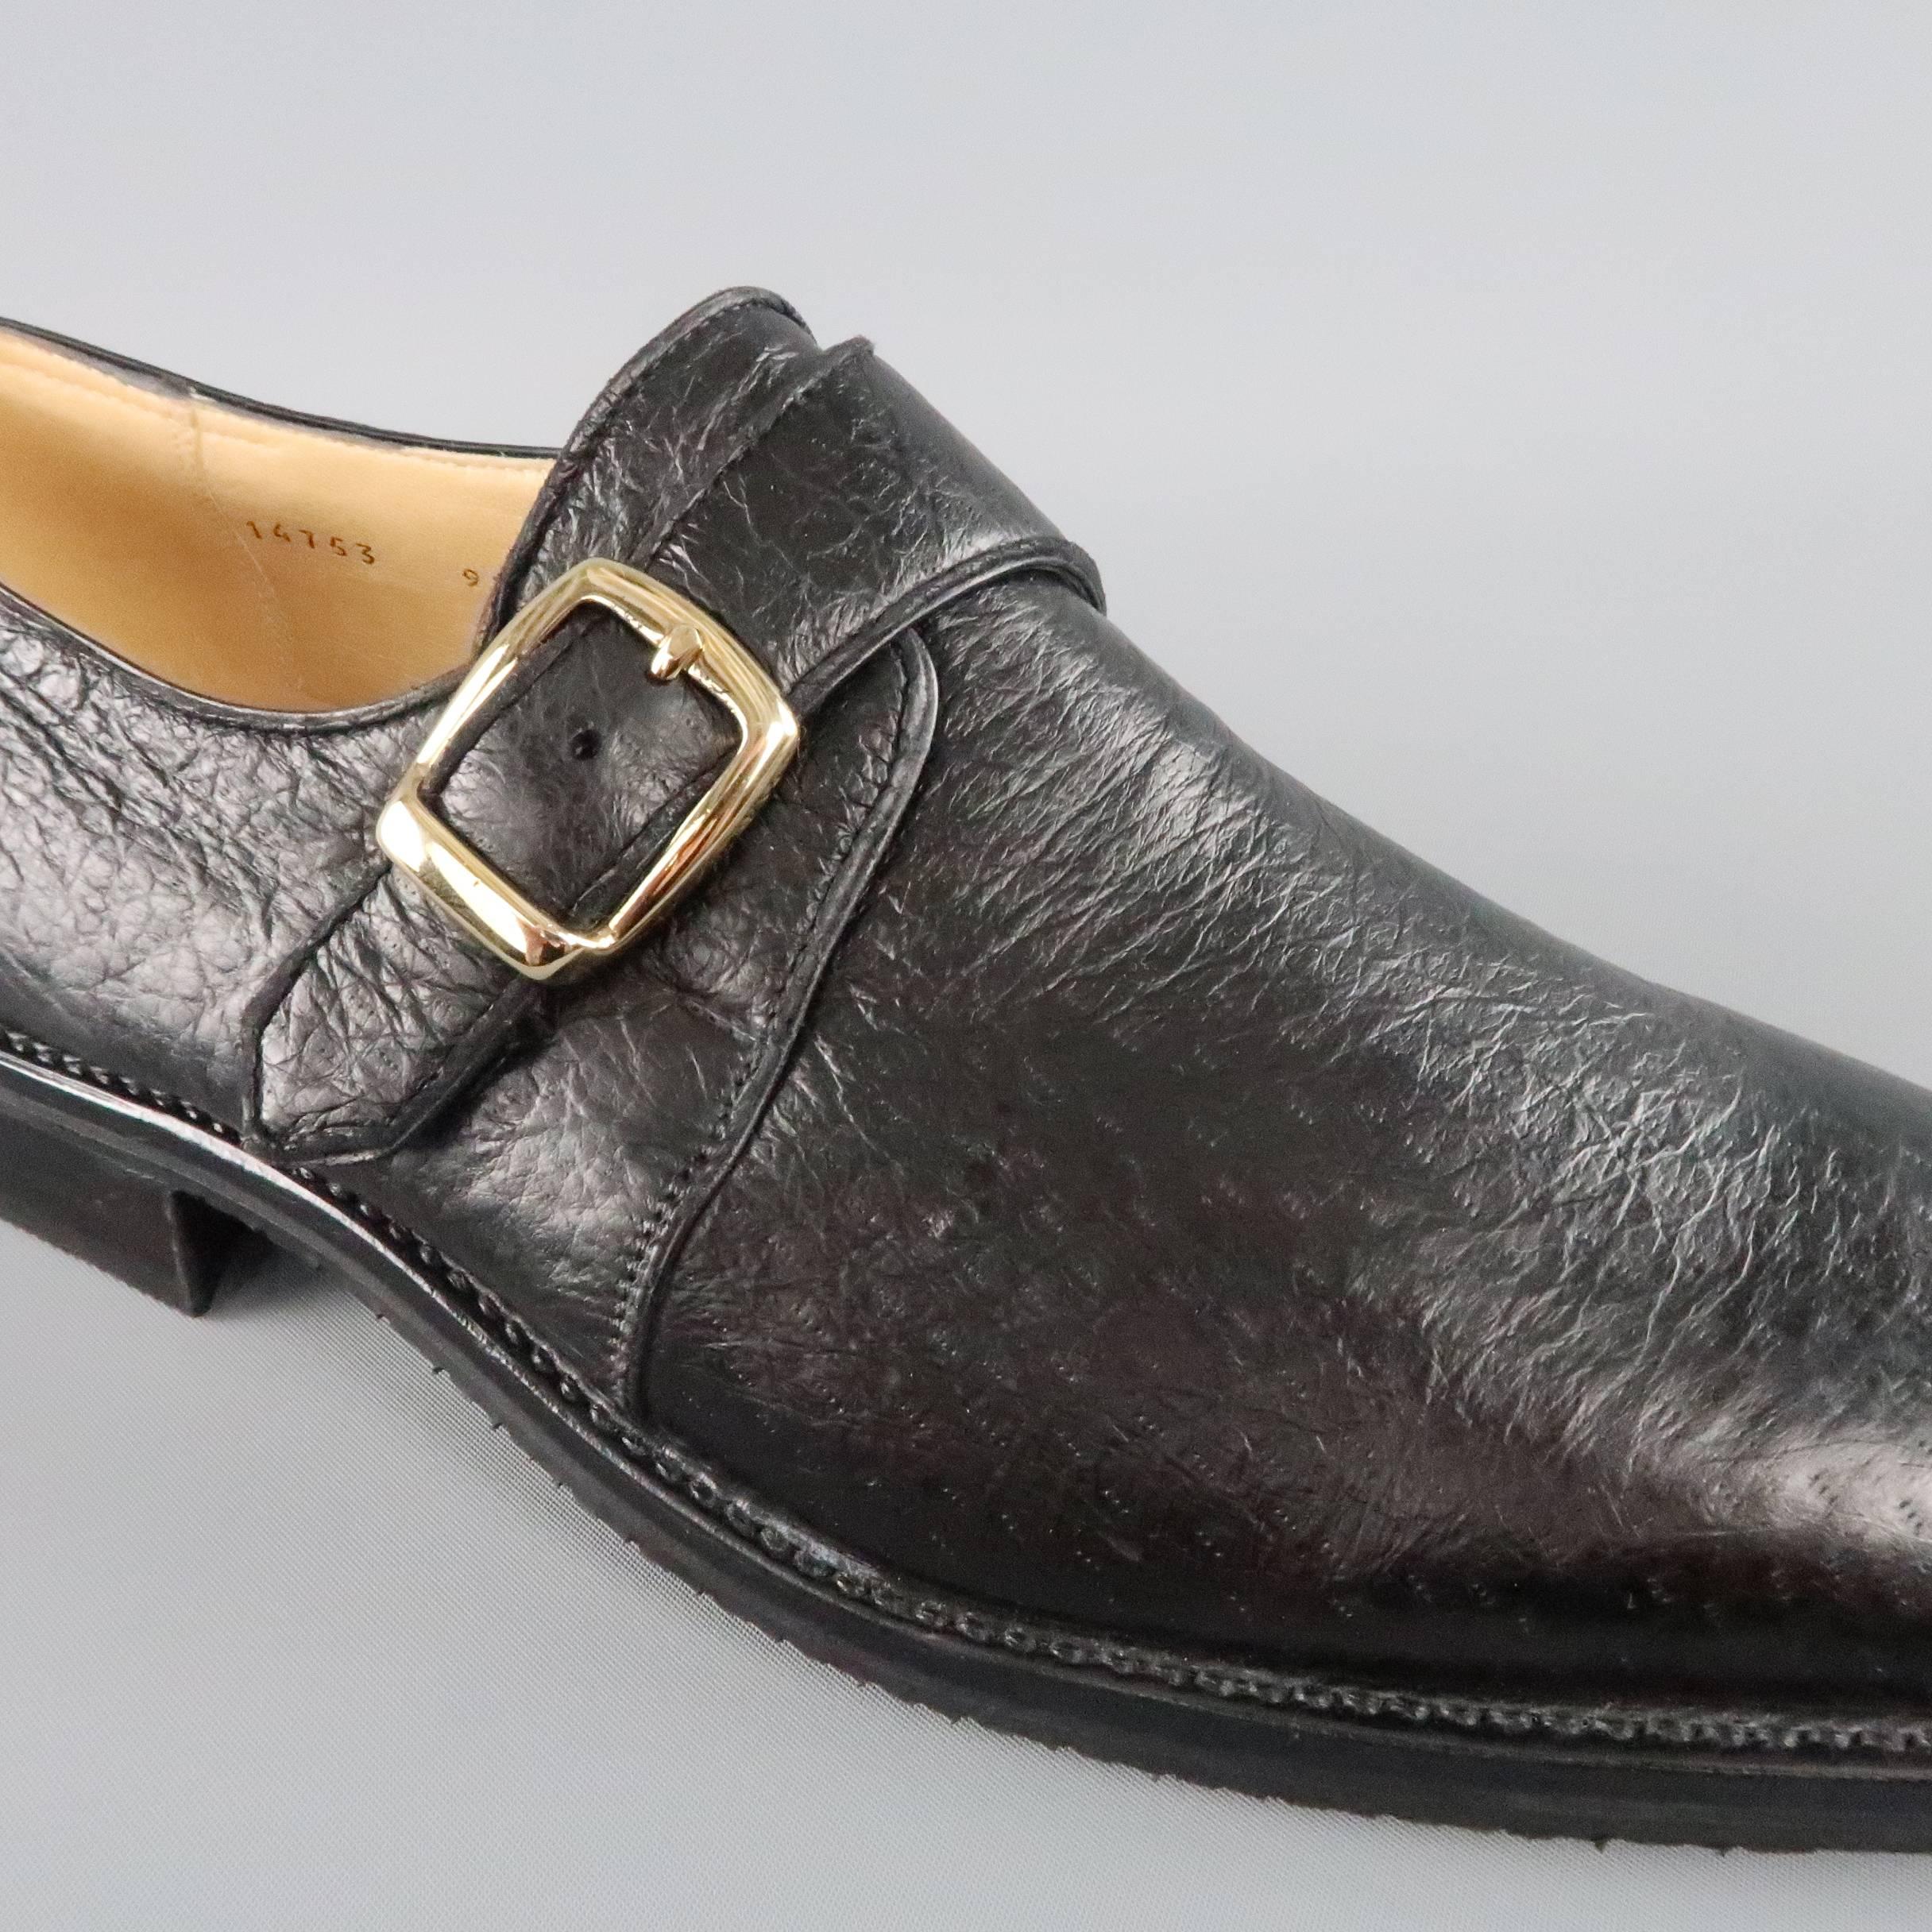 GRAVATI dress shoes come in textured black leather with a squared off tapered toe, and single monk strap with gold tone buckle. With Box. Hand Made in Italy.
 
New in Box.
Marked:9.5 M
 
Outsole: 12 x 4 in.

SKU: 81868